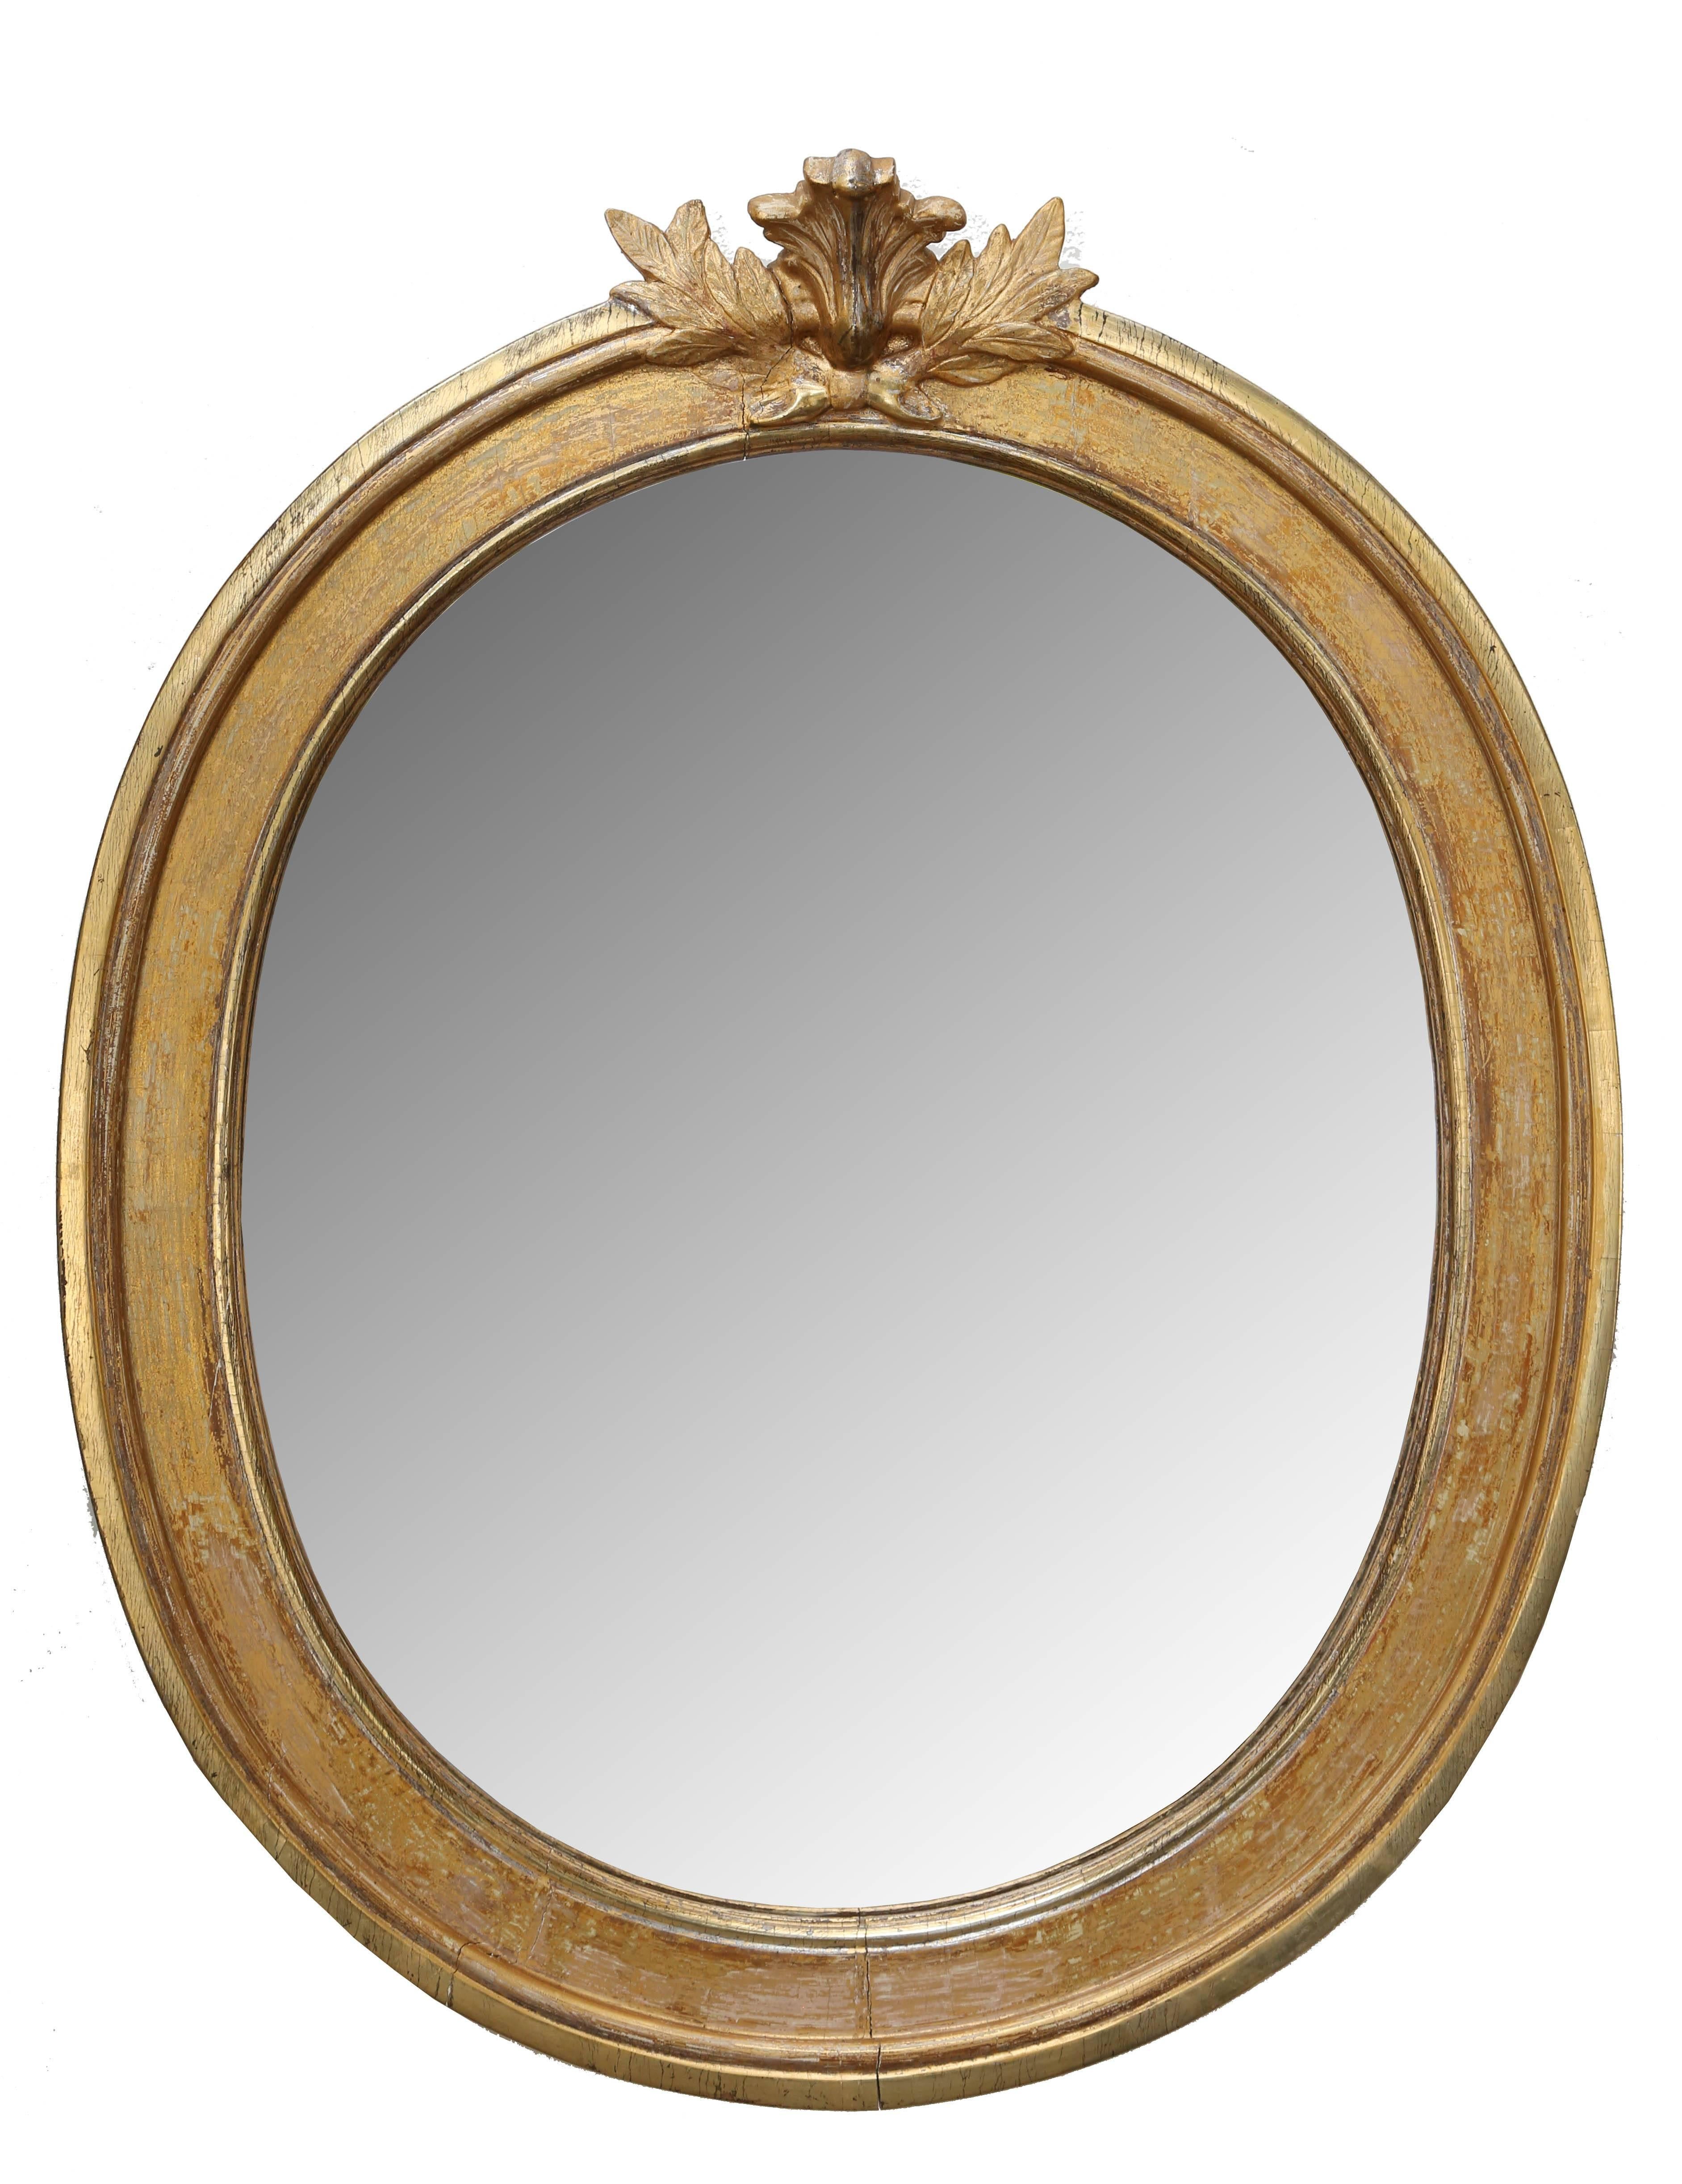 Pair of Antique Swedish Late Gustavian Giltwood Mirrors, Early 19th Century For Sale 2